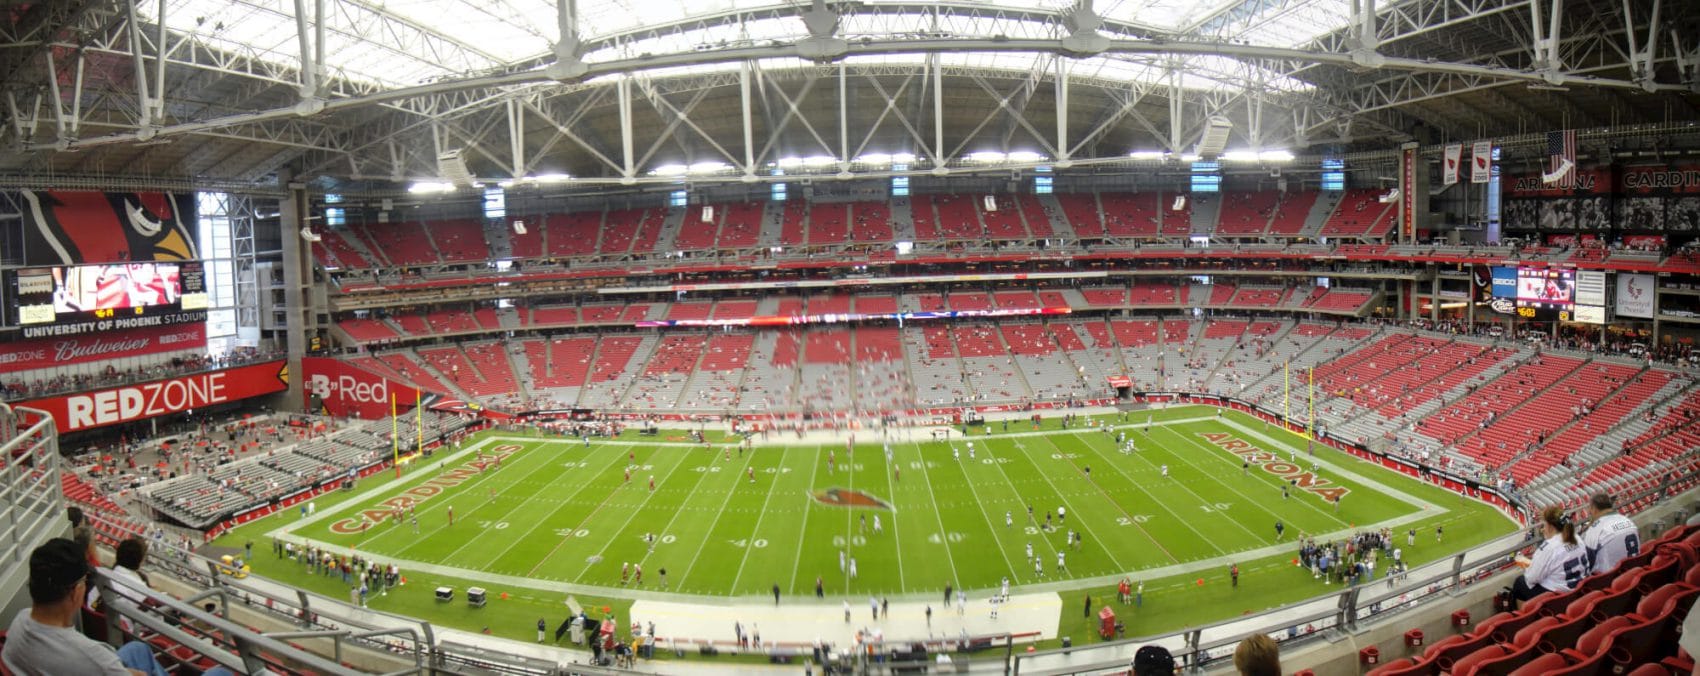 The University of Phoenix stadium is filling up before a game